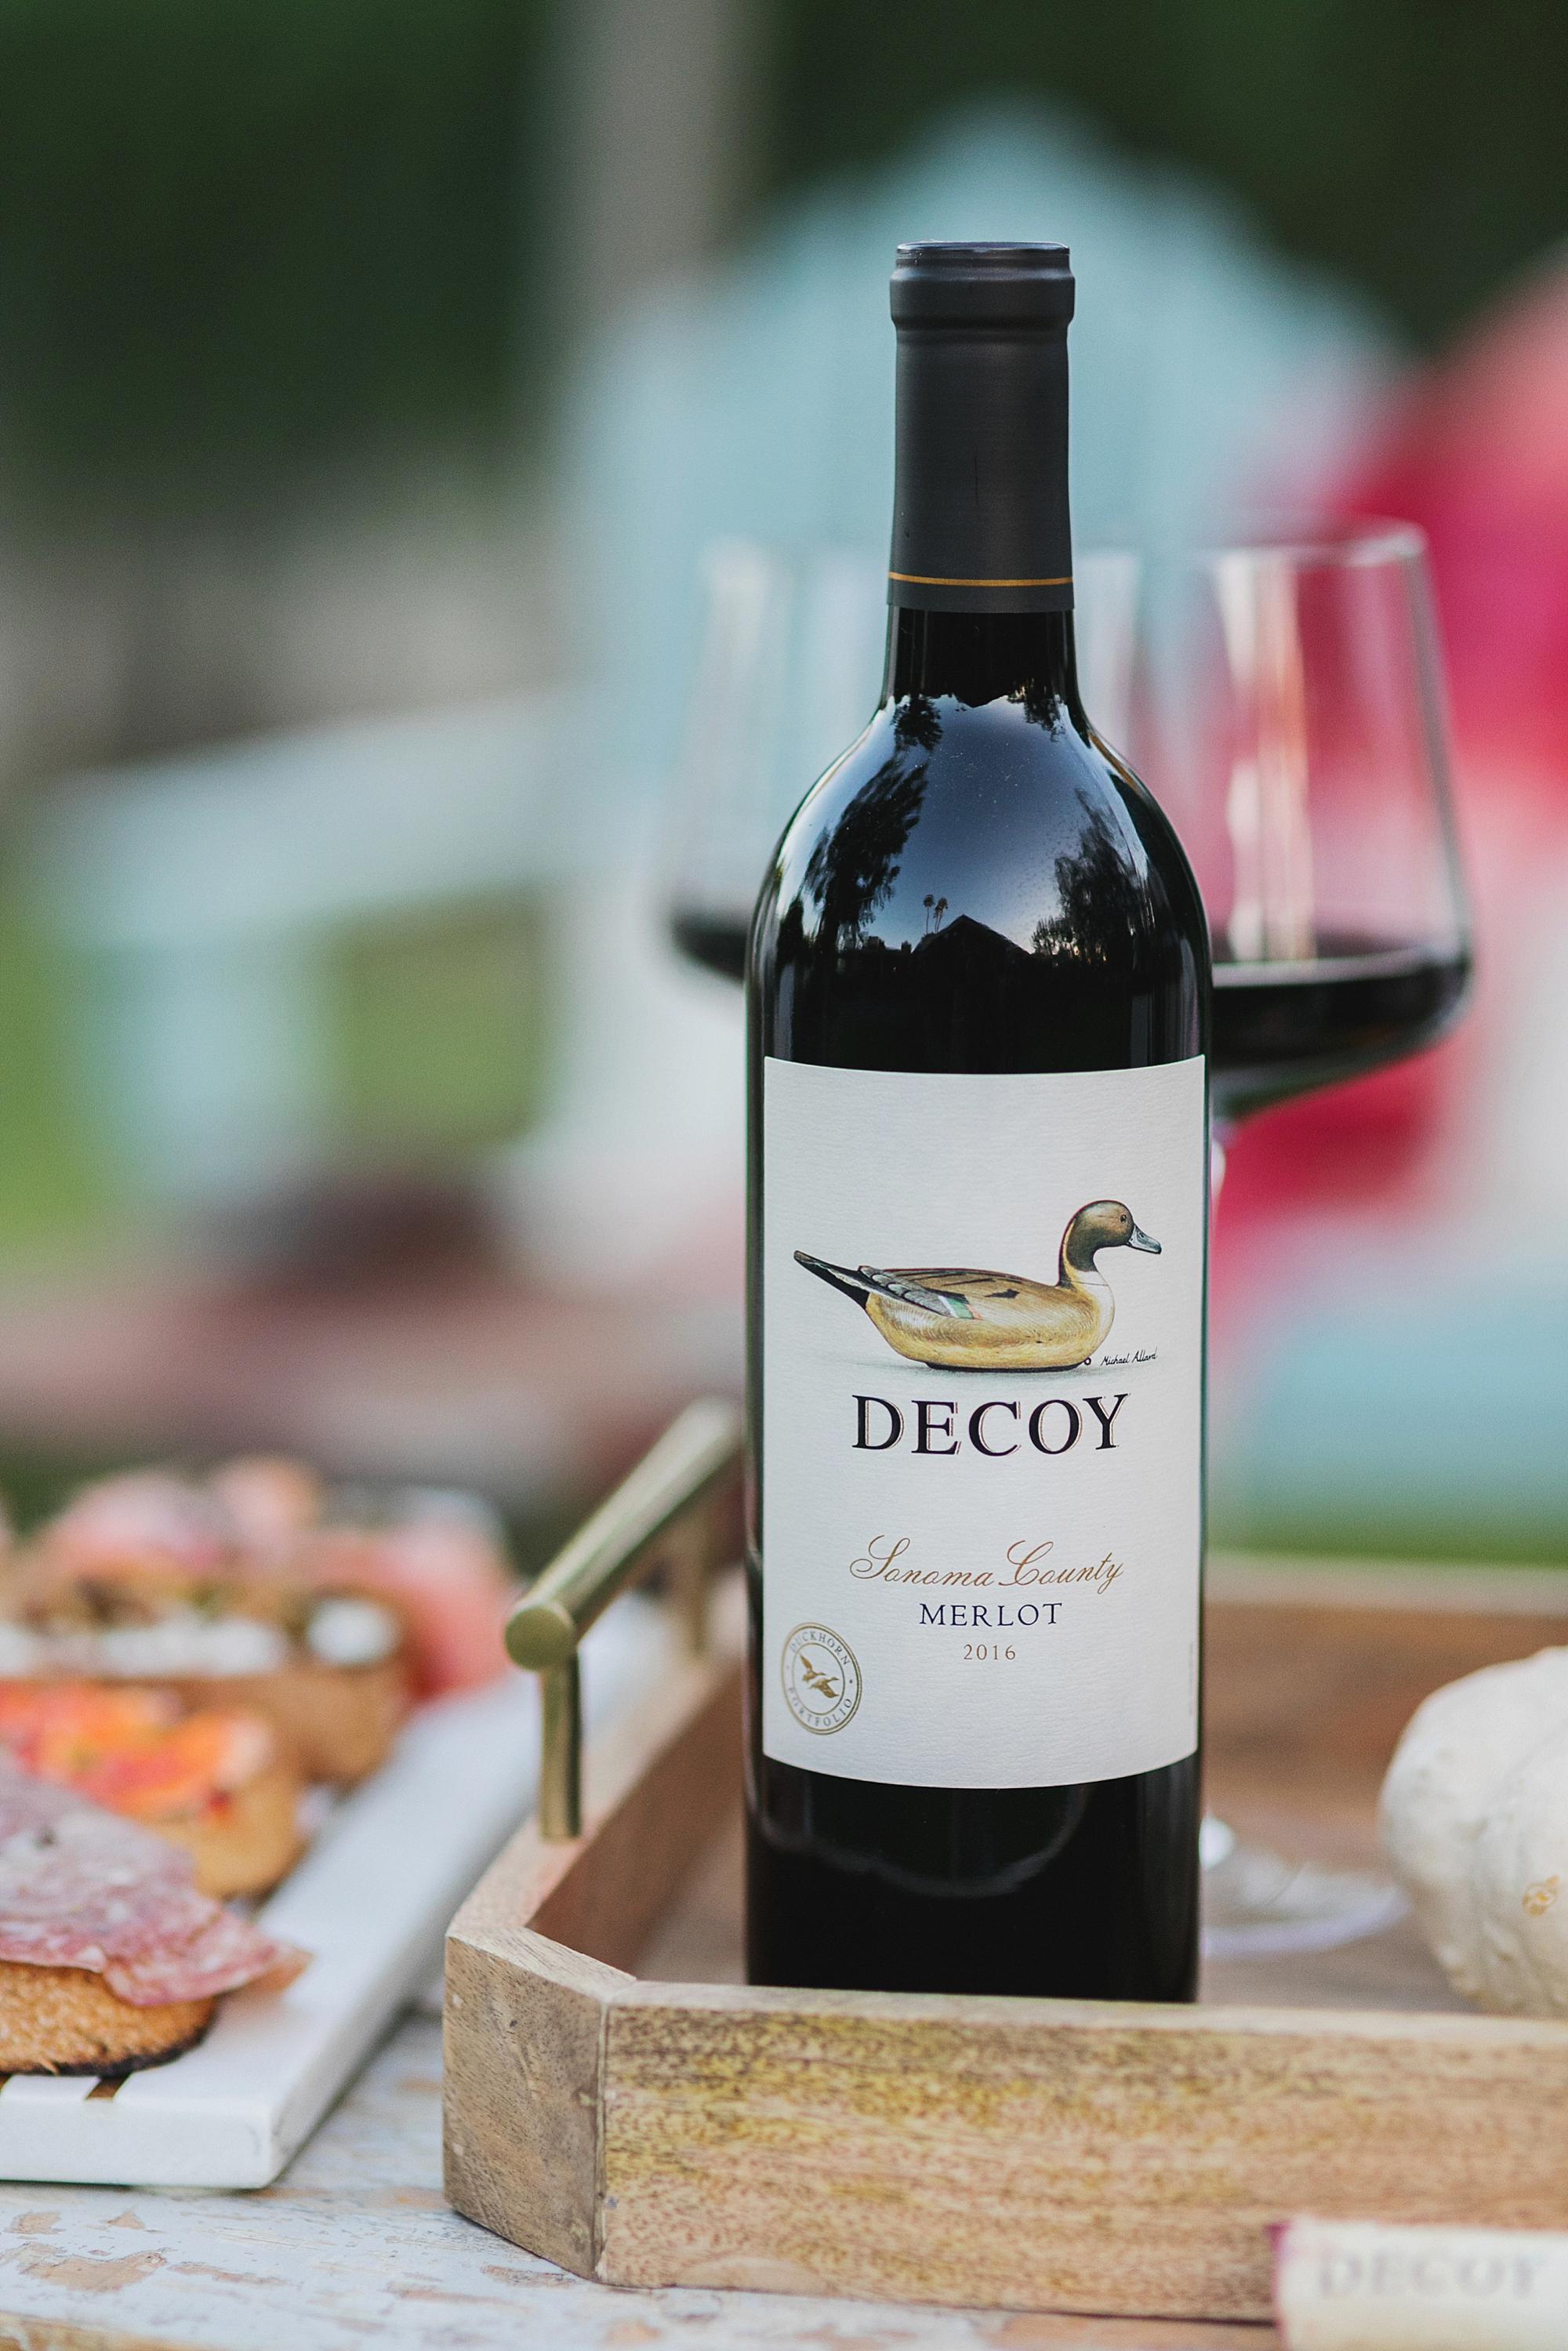 decoy wine merlot to celebrate merlot month of October! backyard setup with fire pit and bruschetta boards with blogger Diana Elizabeth - hay bales pumpkins, gourds and cozy blankets and pillows